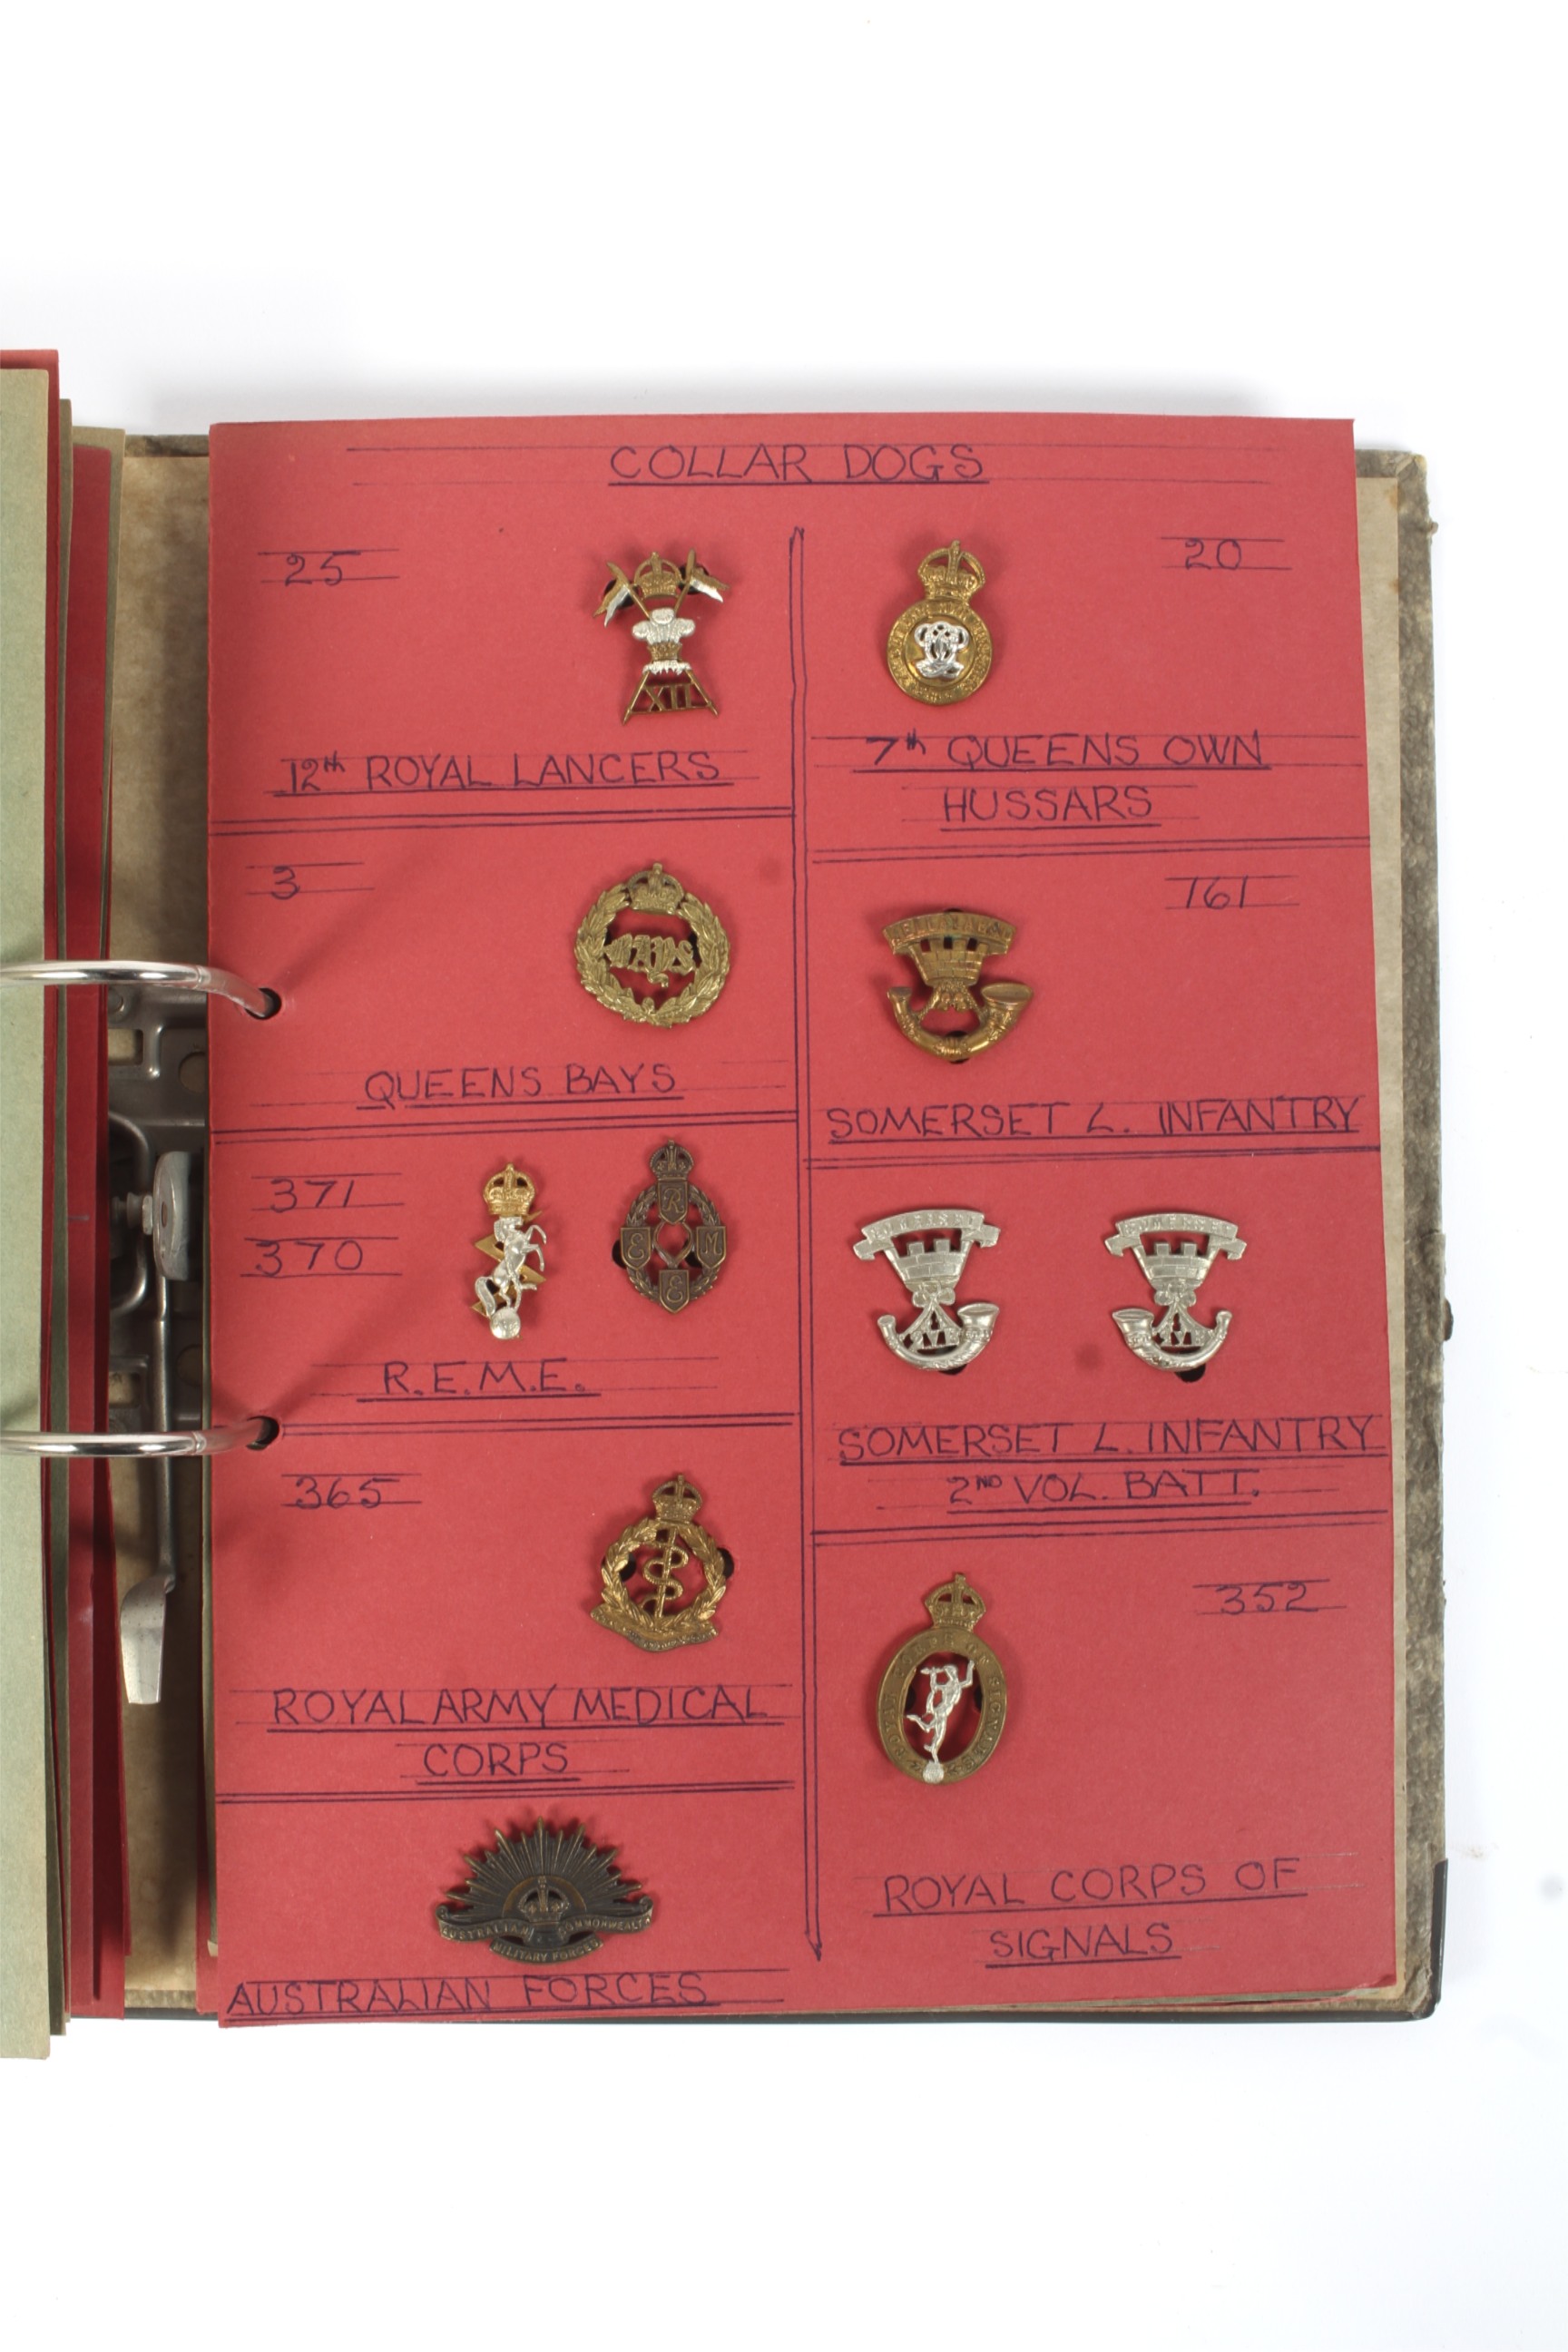 A collection of assorted sixty eight vintage military collar dogs badges.